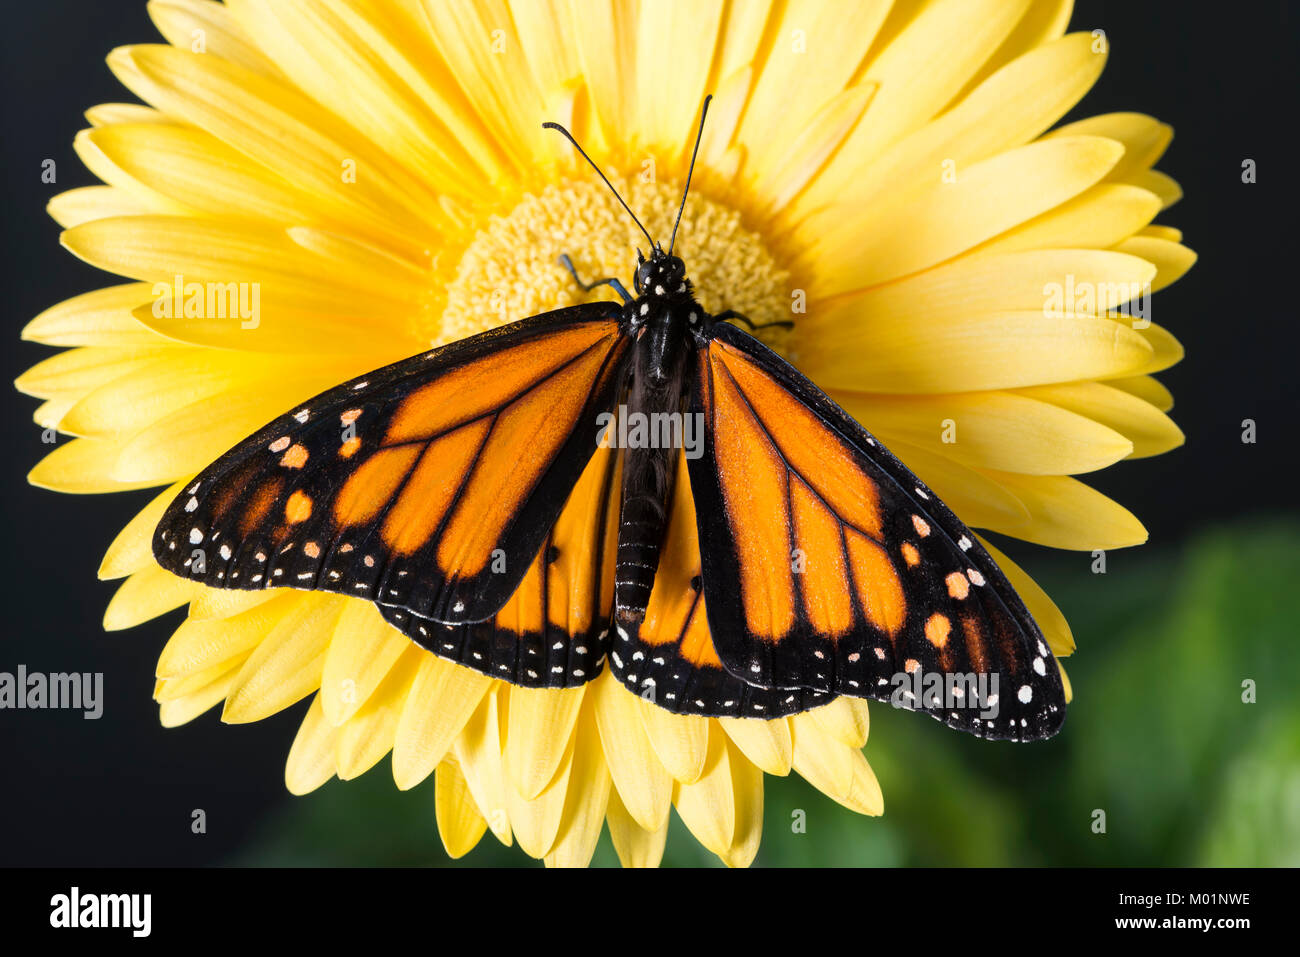 Monarch butterfly Danaus Plexippus with wings spread while resting on a bright yellow gerbera daisy flower - top view Stock Photo